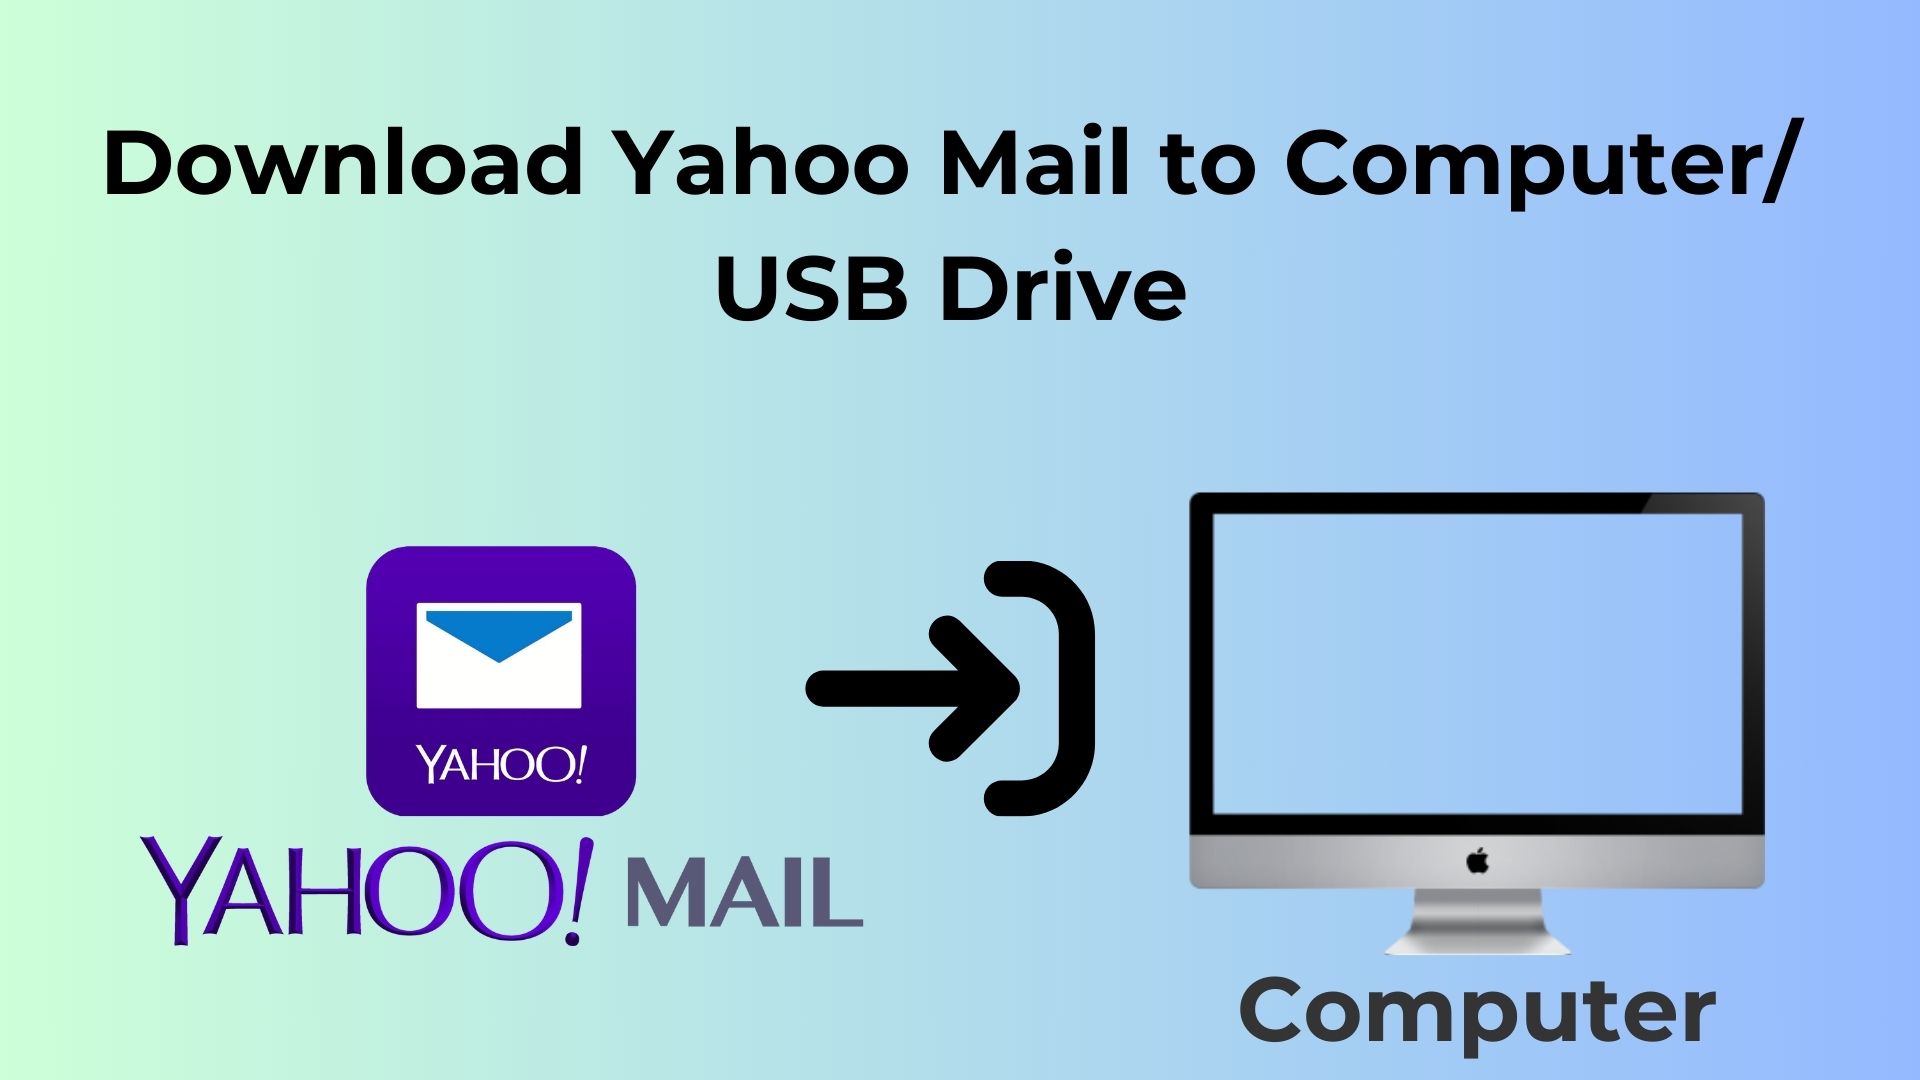 Download Yahoo Mail to Computer/USB drive